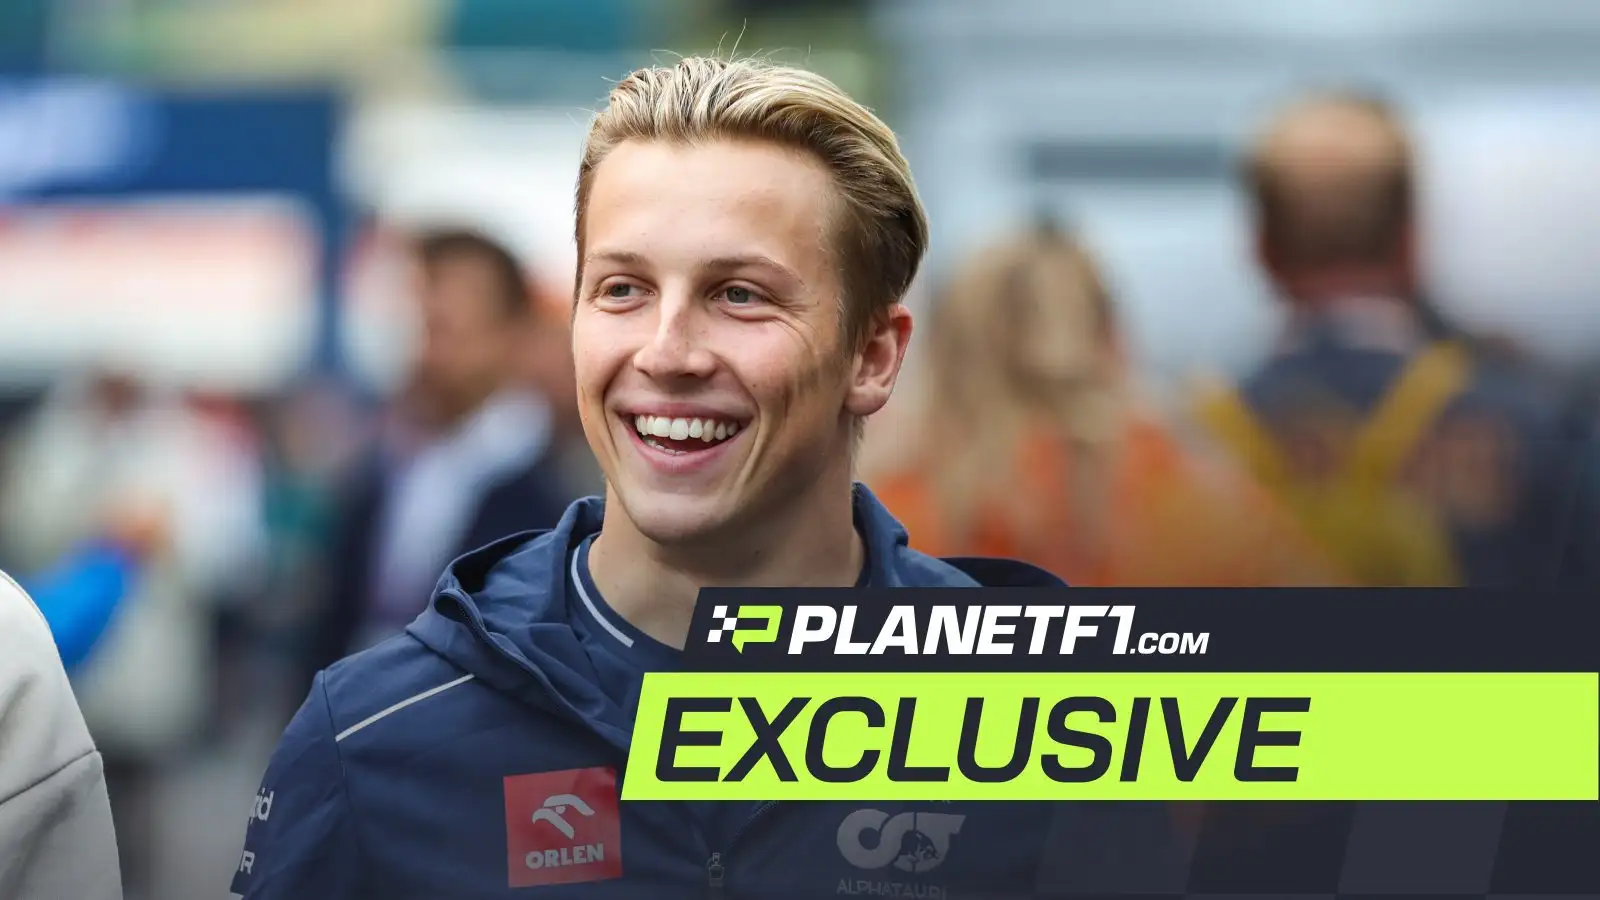 Liam Lawson enters the F1 paddock for the first time as a full-fledged F1 driver